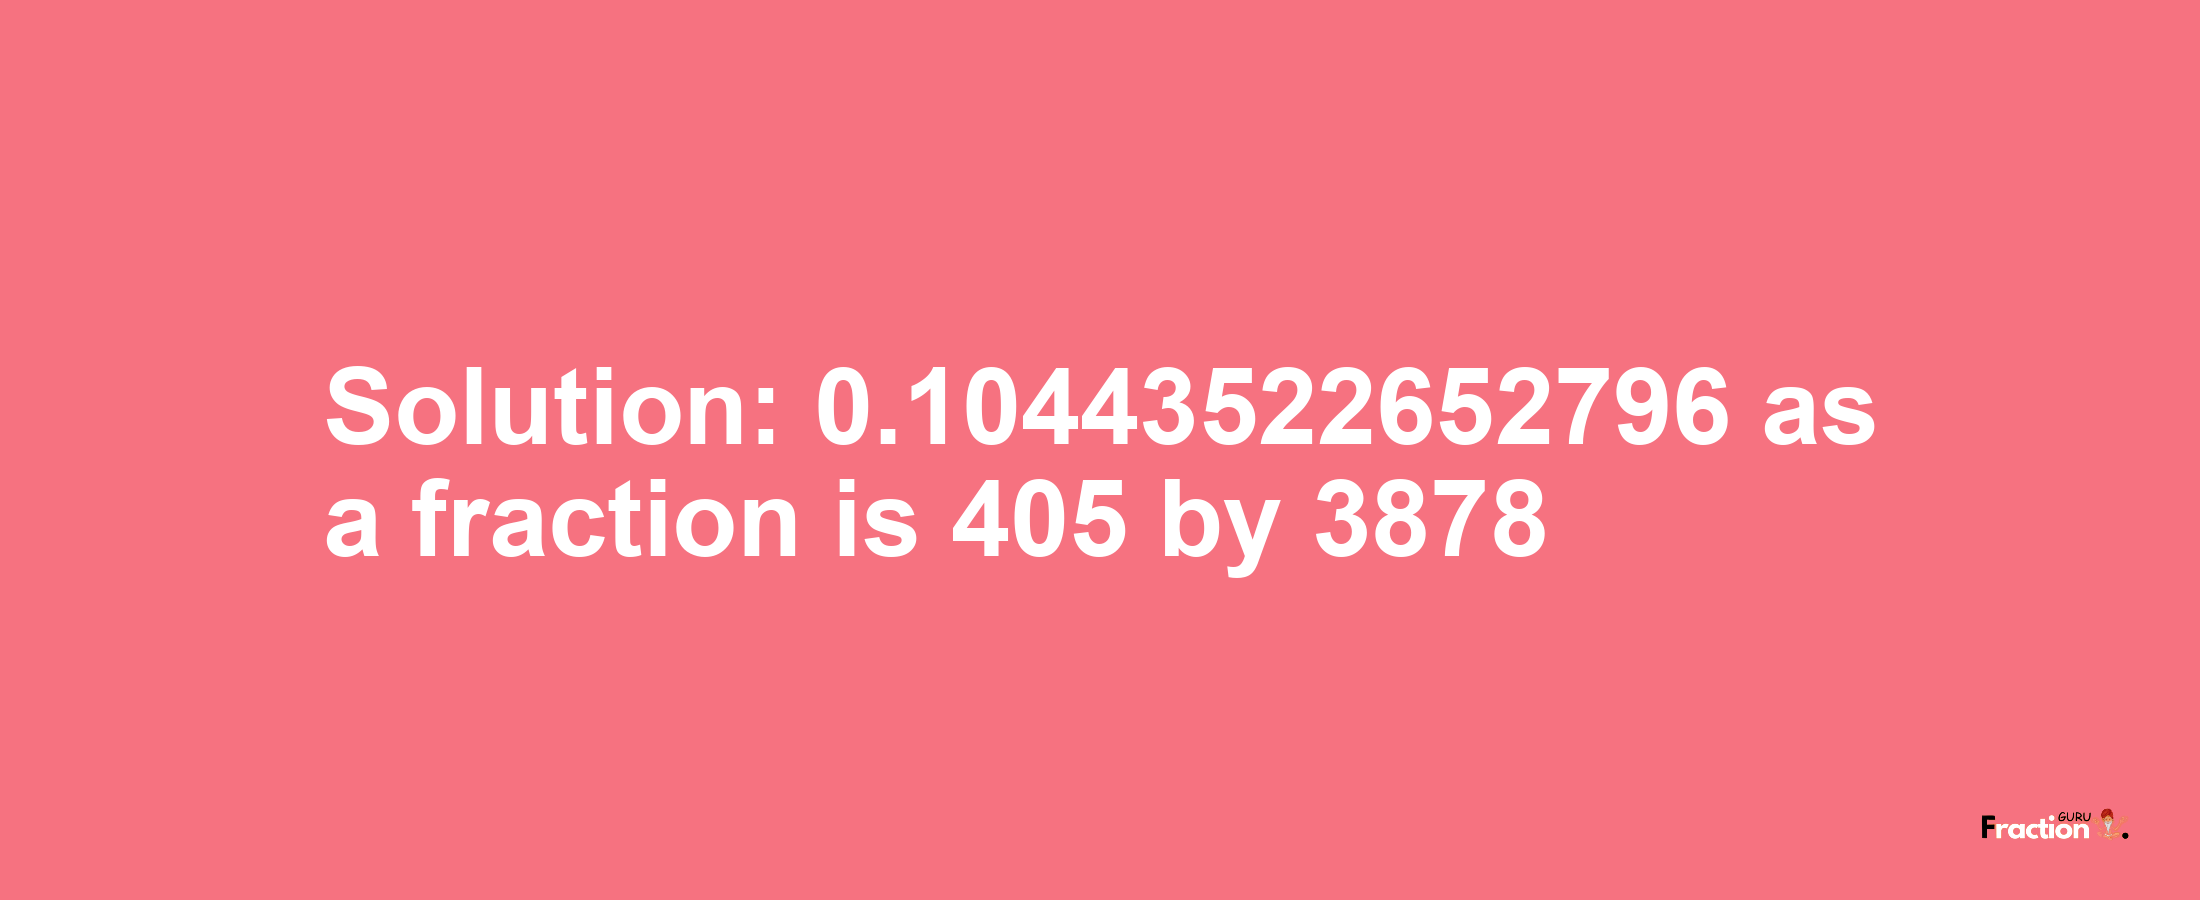 Solution:0.10443522652796 as a fraction is 405/3878